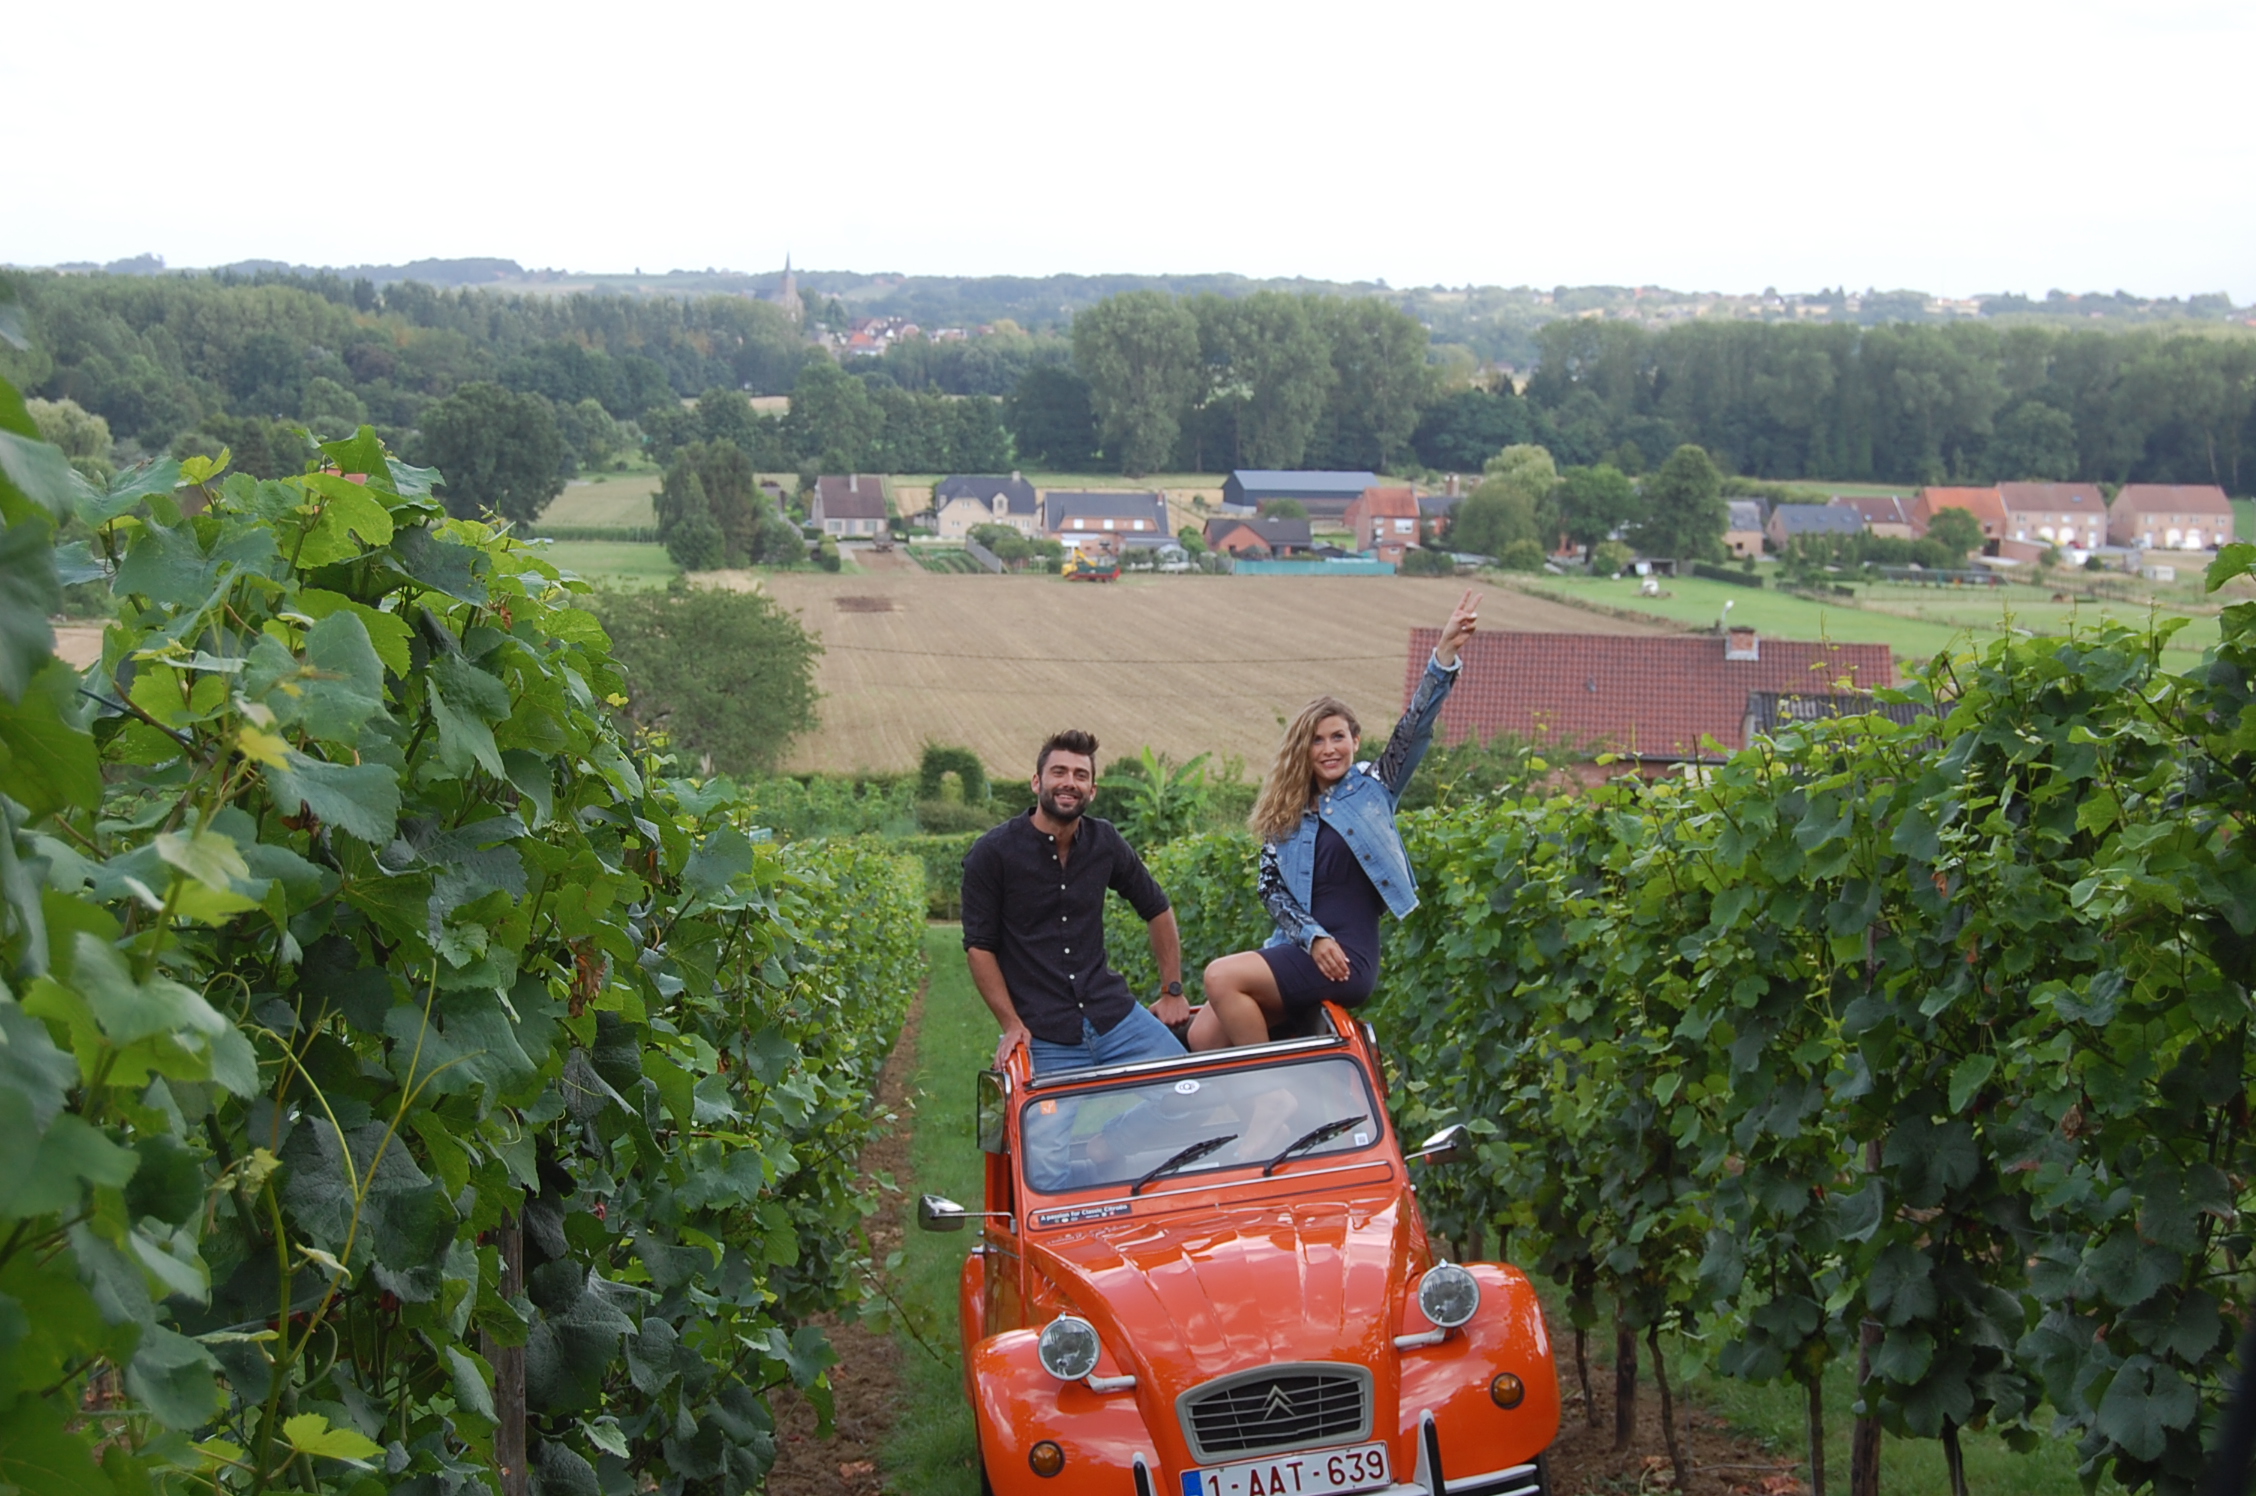 The Hageland meets Leuven with our 2CV